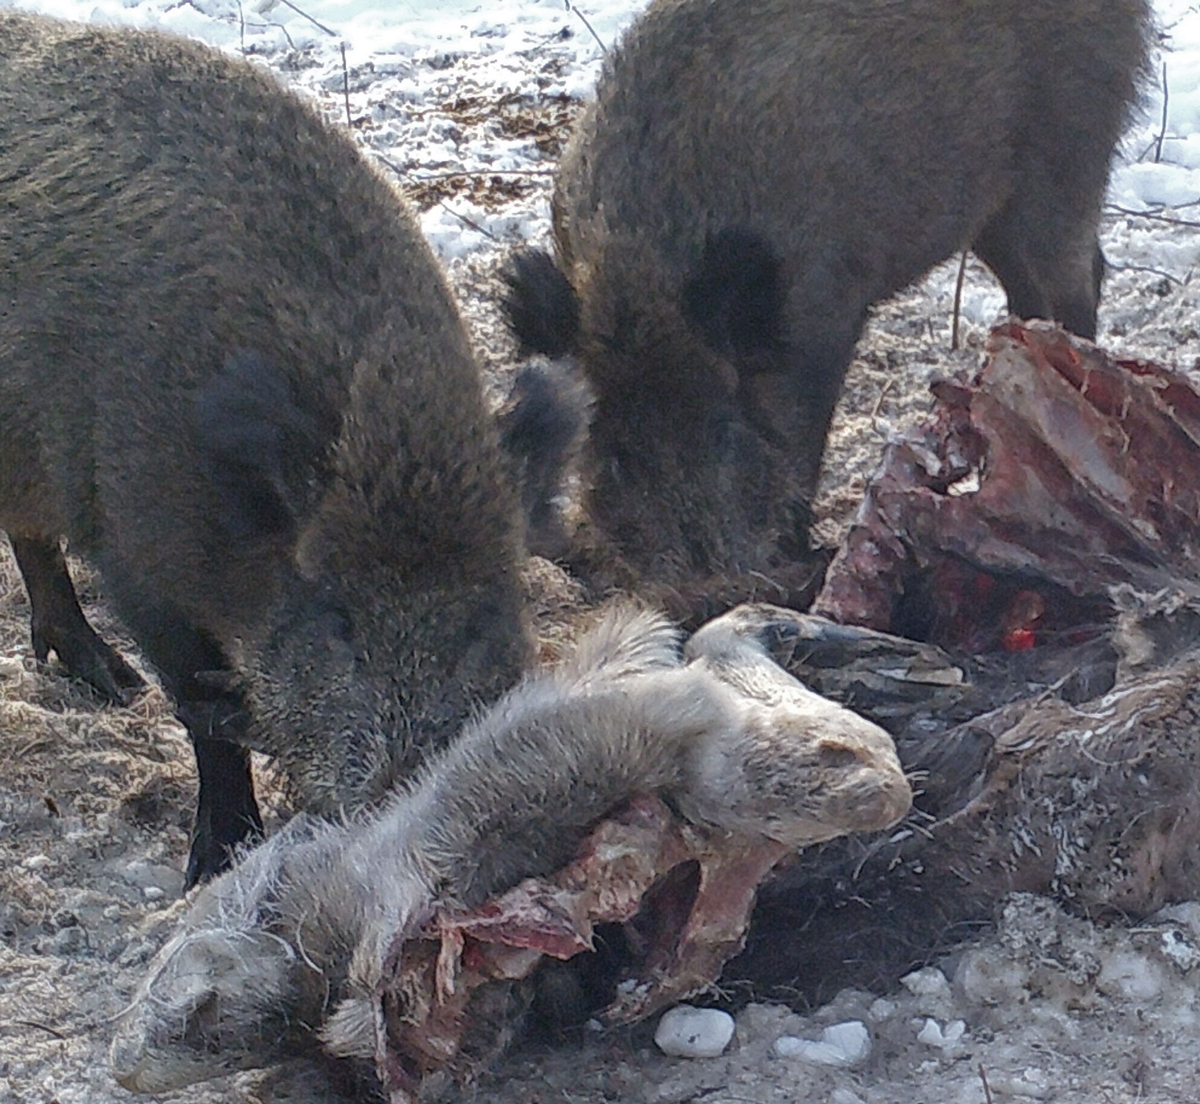 Dying of wild ungulates in the harsh conditions of too deep snow cover and which scavengers consume their carcasses